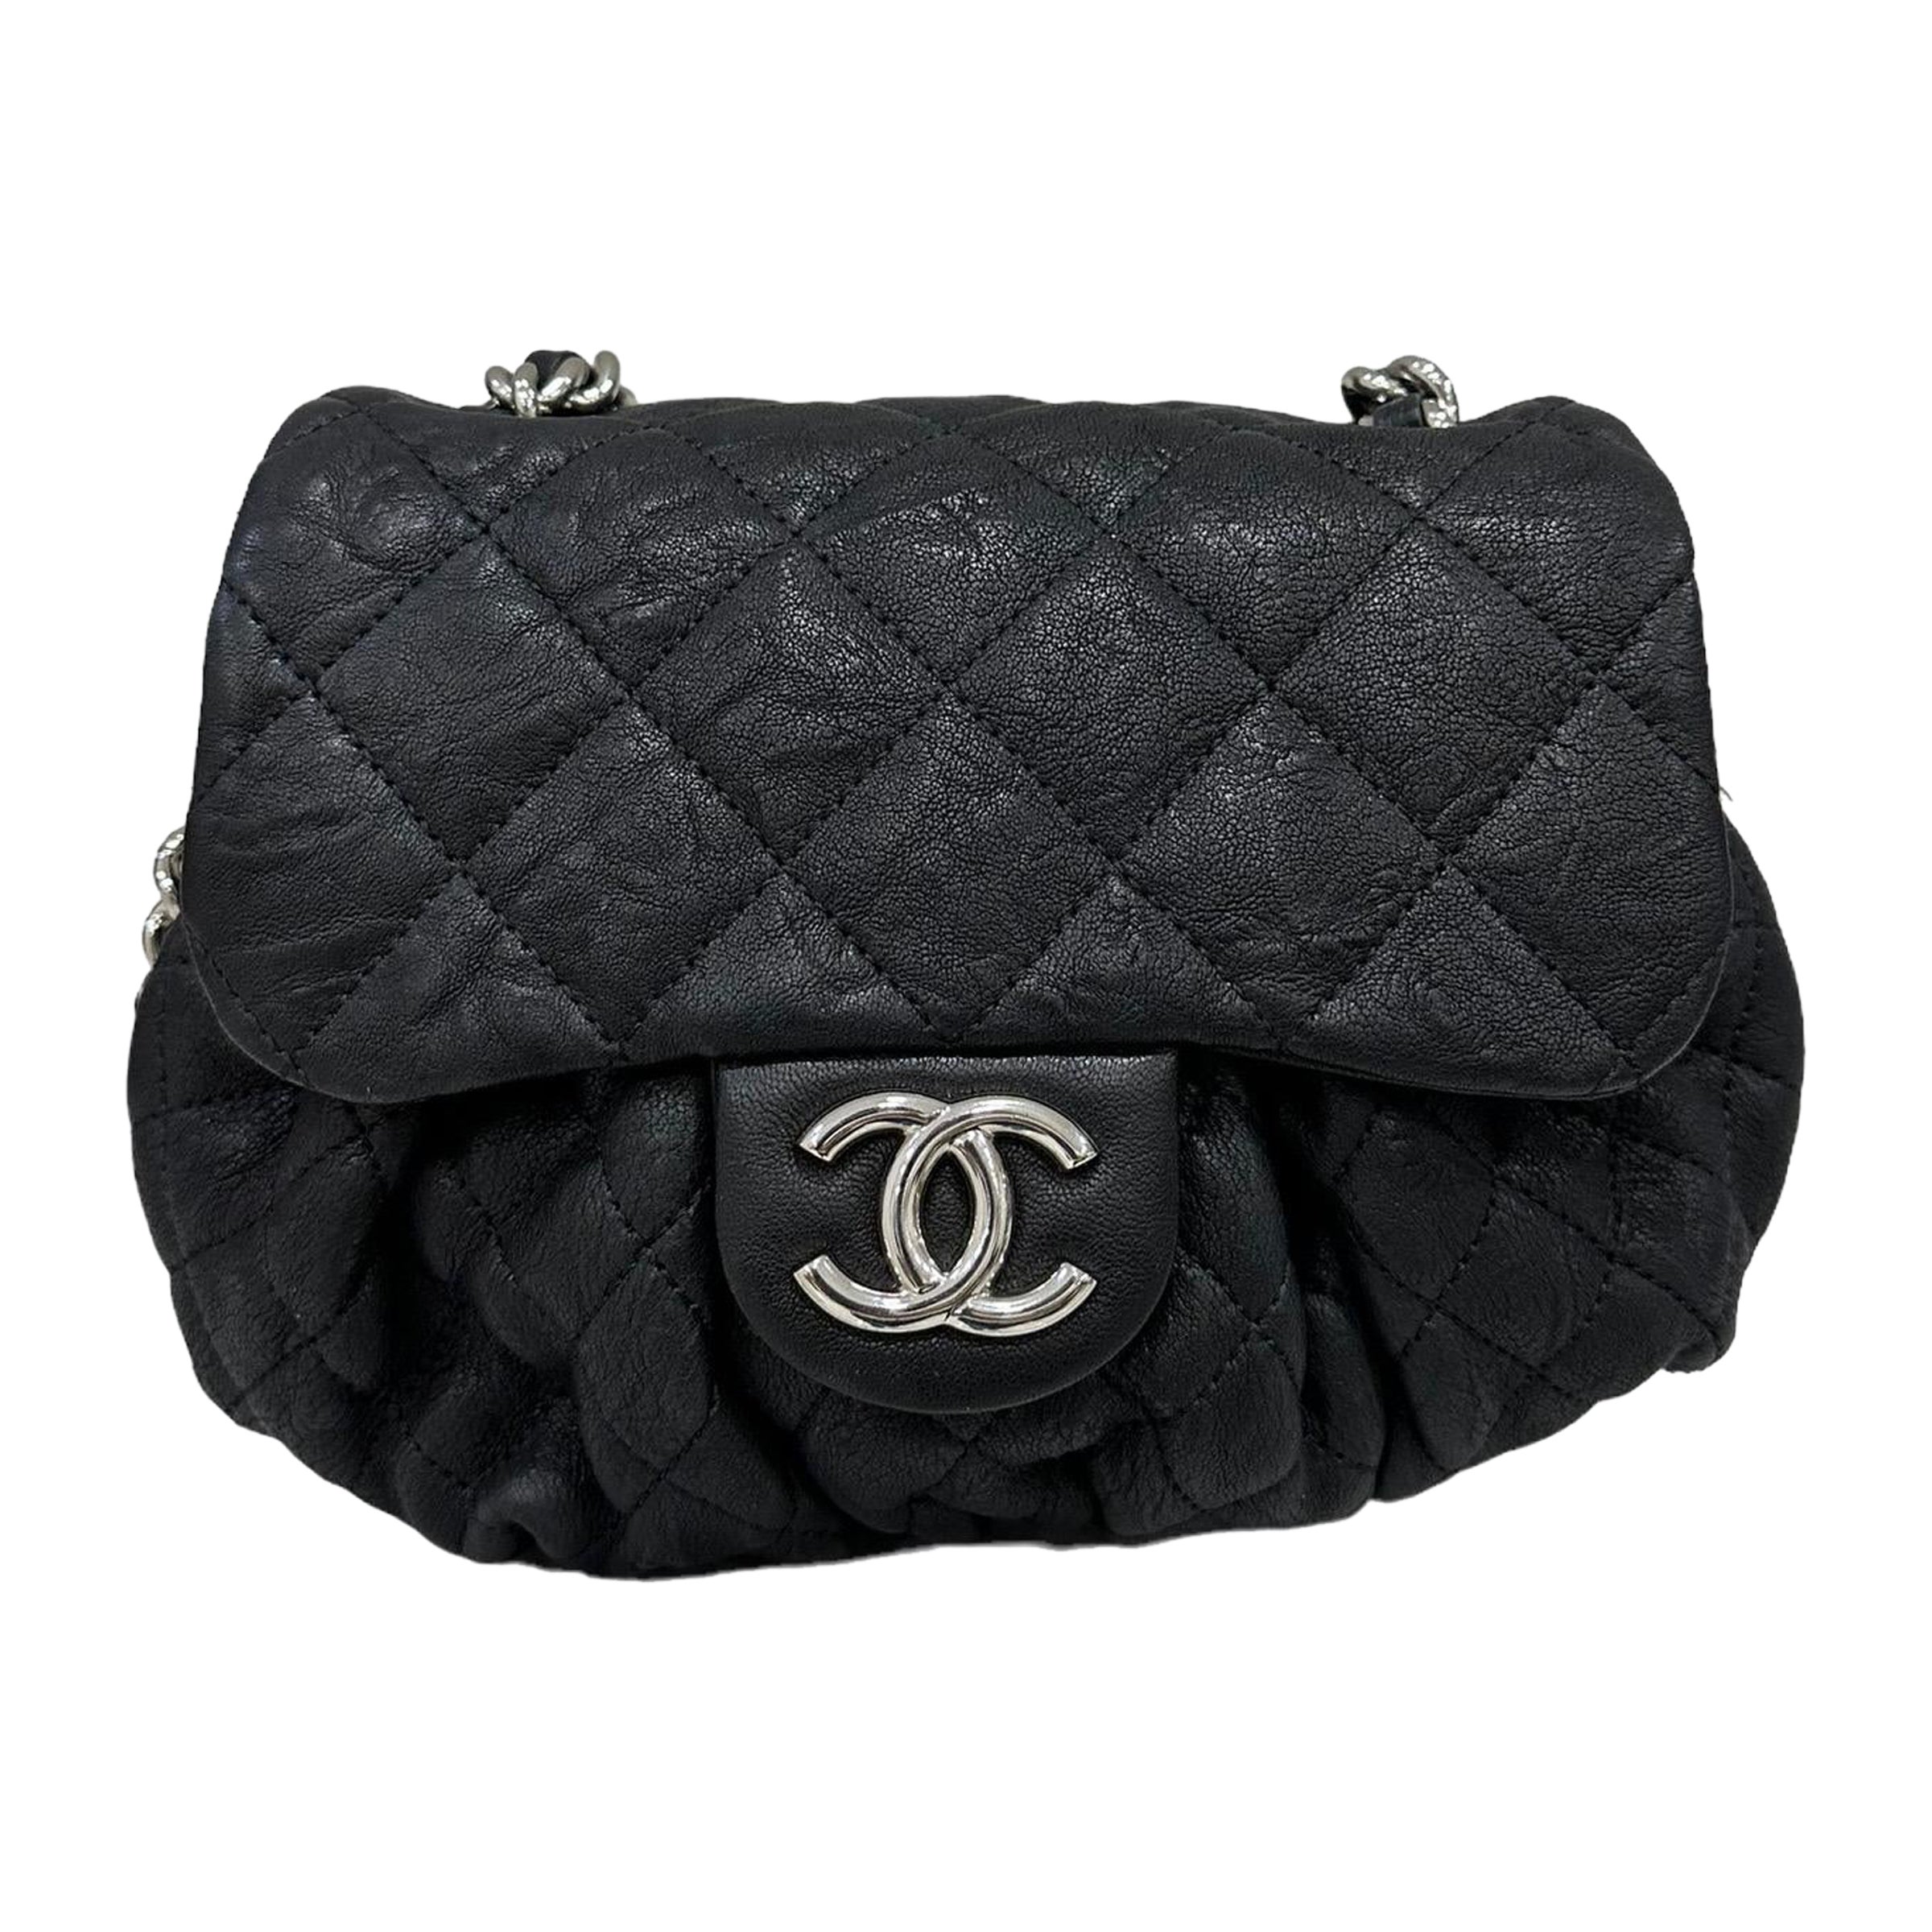 chanel white and black backpack purse